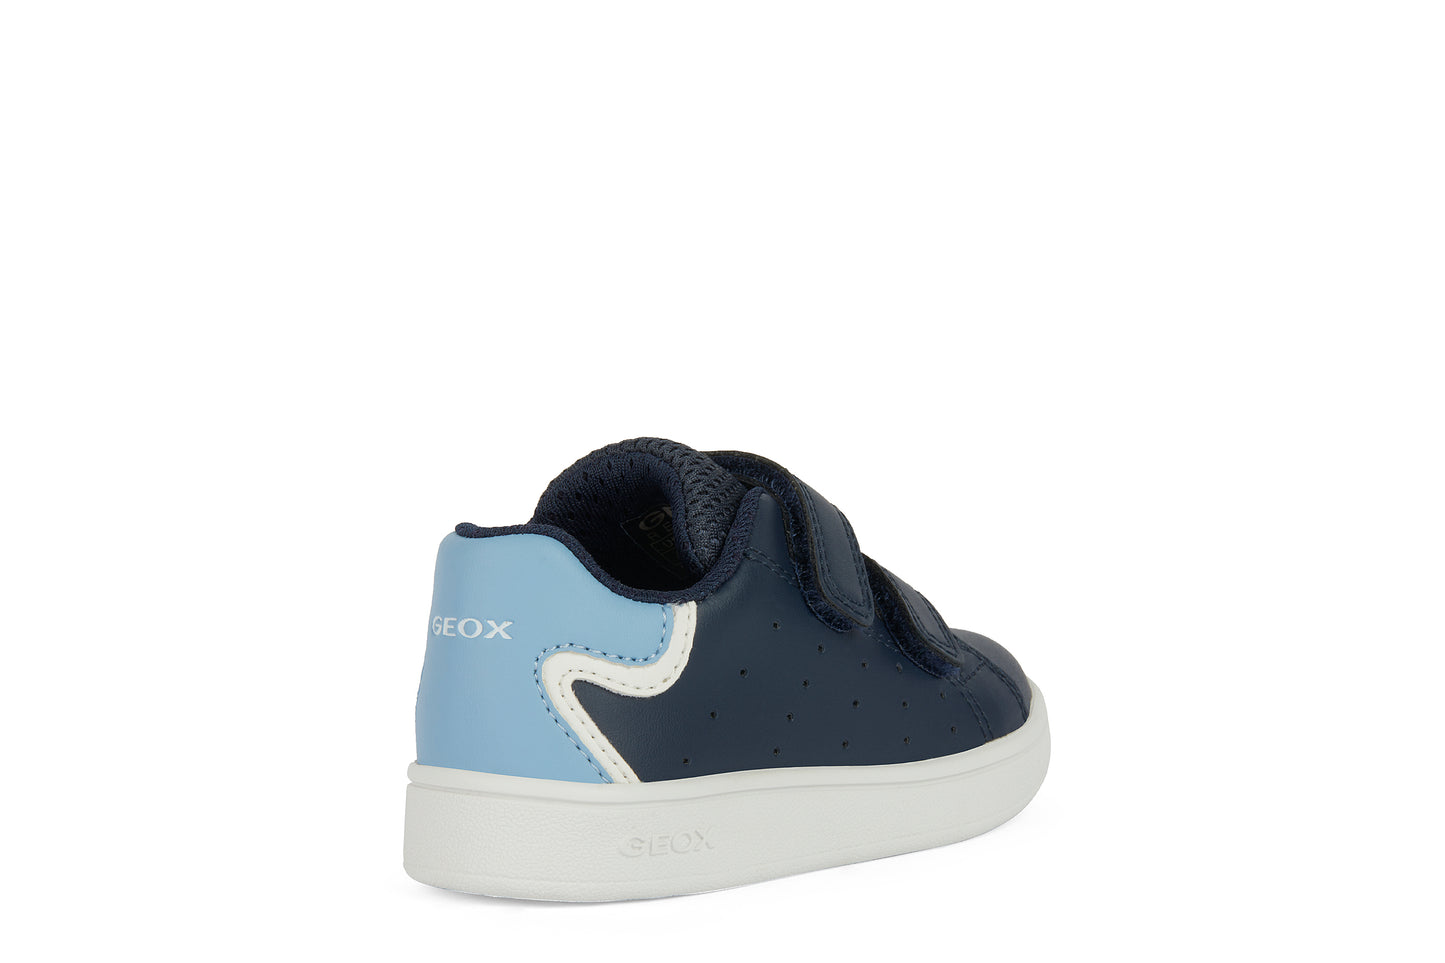 A boys casual shoe by Geox, style B Eclyper, in navy, light blue and white with double velcro fastening. Angled right side view.